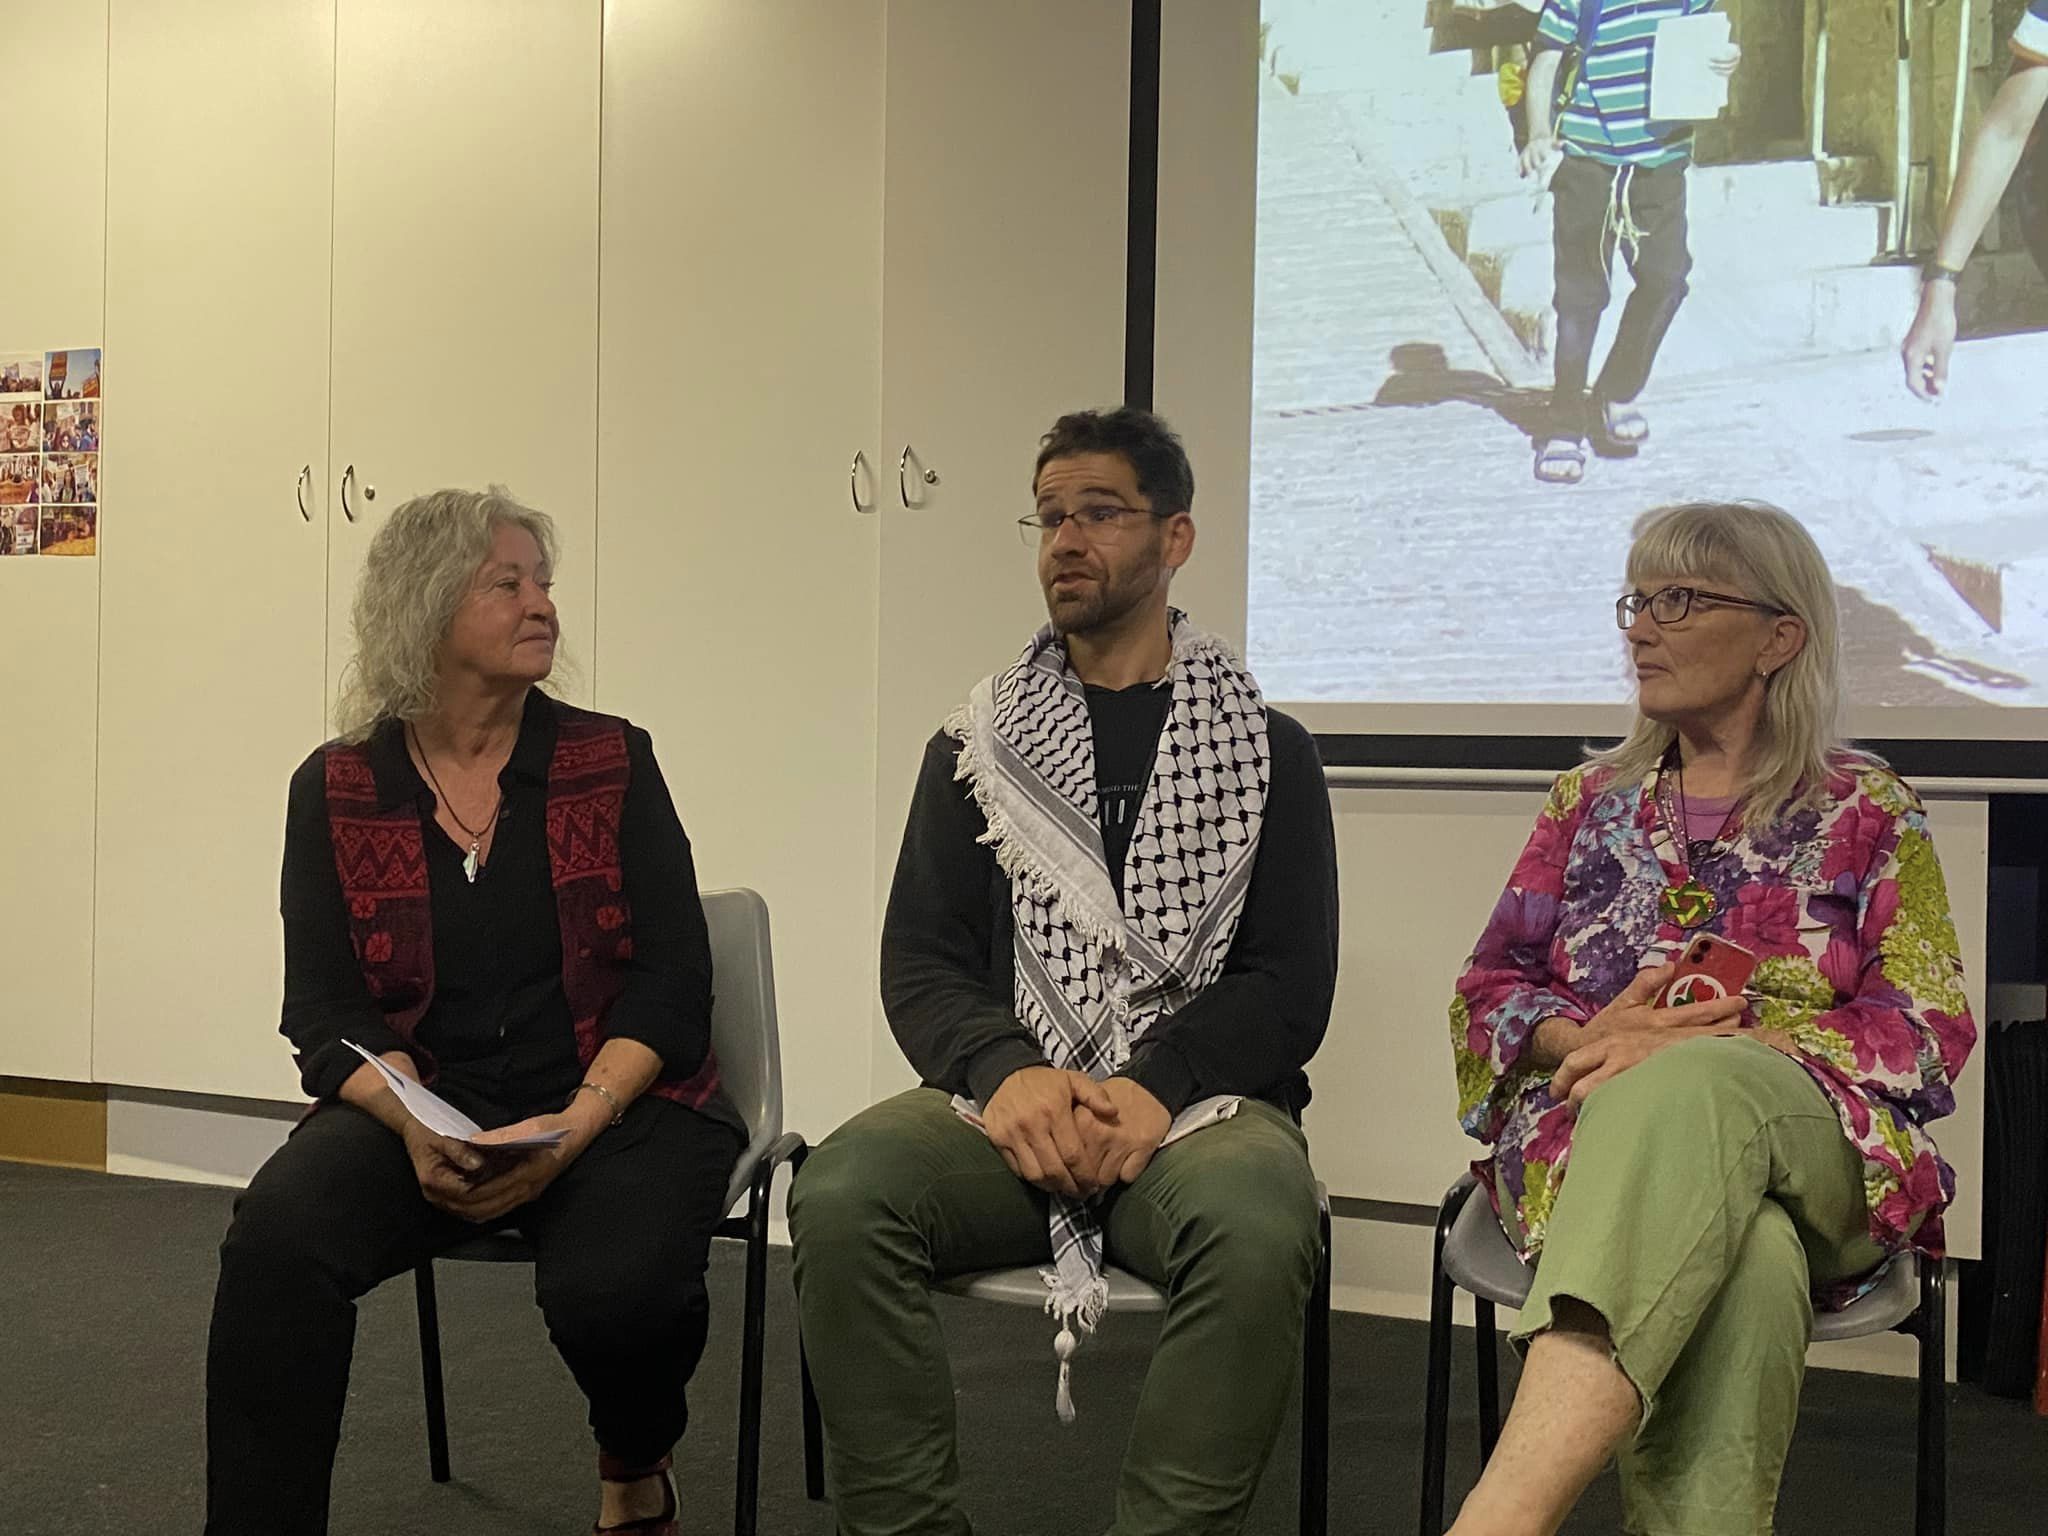 From left: Jill Hickson, Ahmed Abdala and Michelle Berkon discuss the international solidarity movement